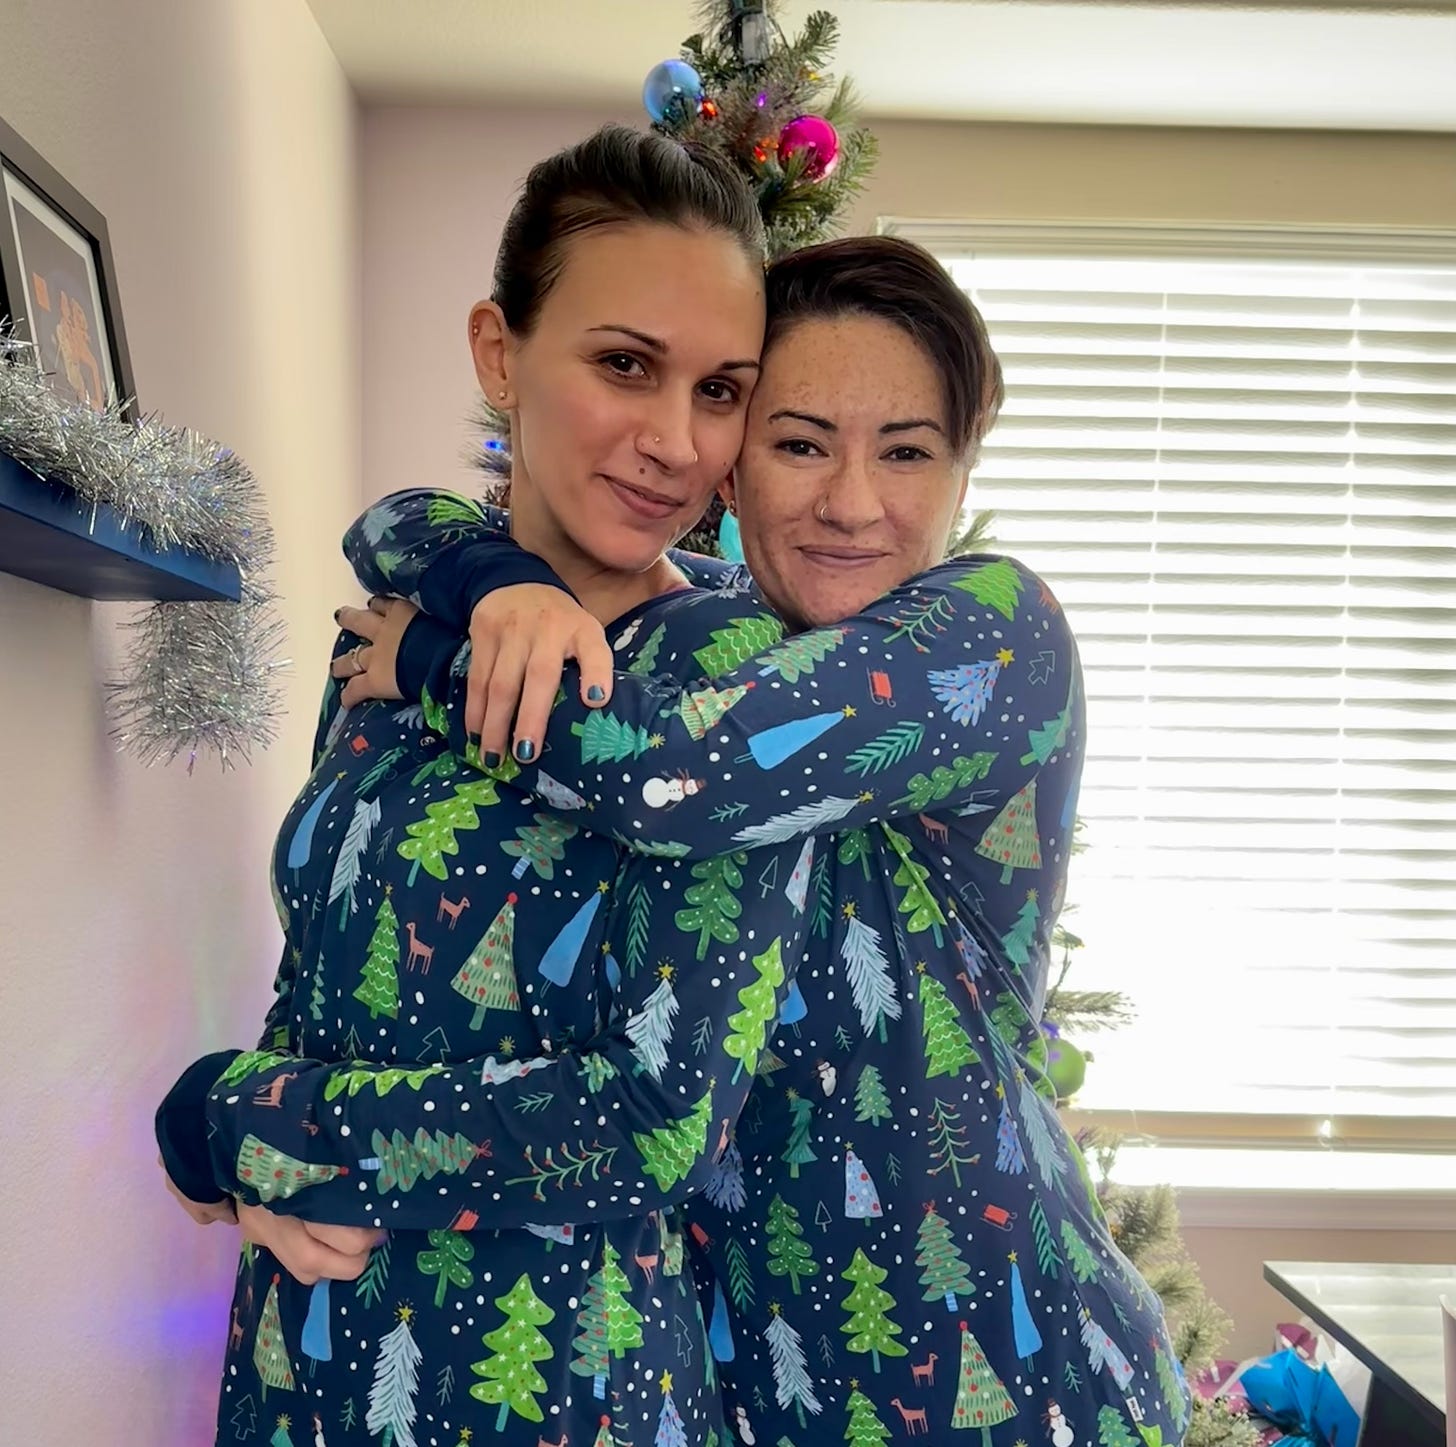 Jessie and Shohreh are in front of the Christmas tree wearing matching blue PJs with a pattern of green Christmas trees on them. Jessie's arms are slung around Shohreh's neck, and they have their heads together